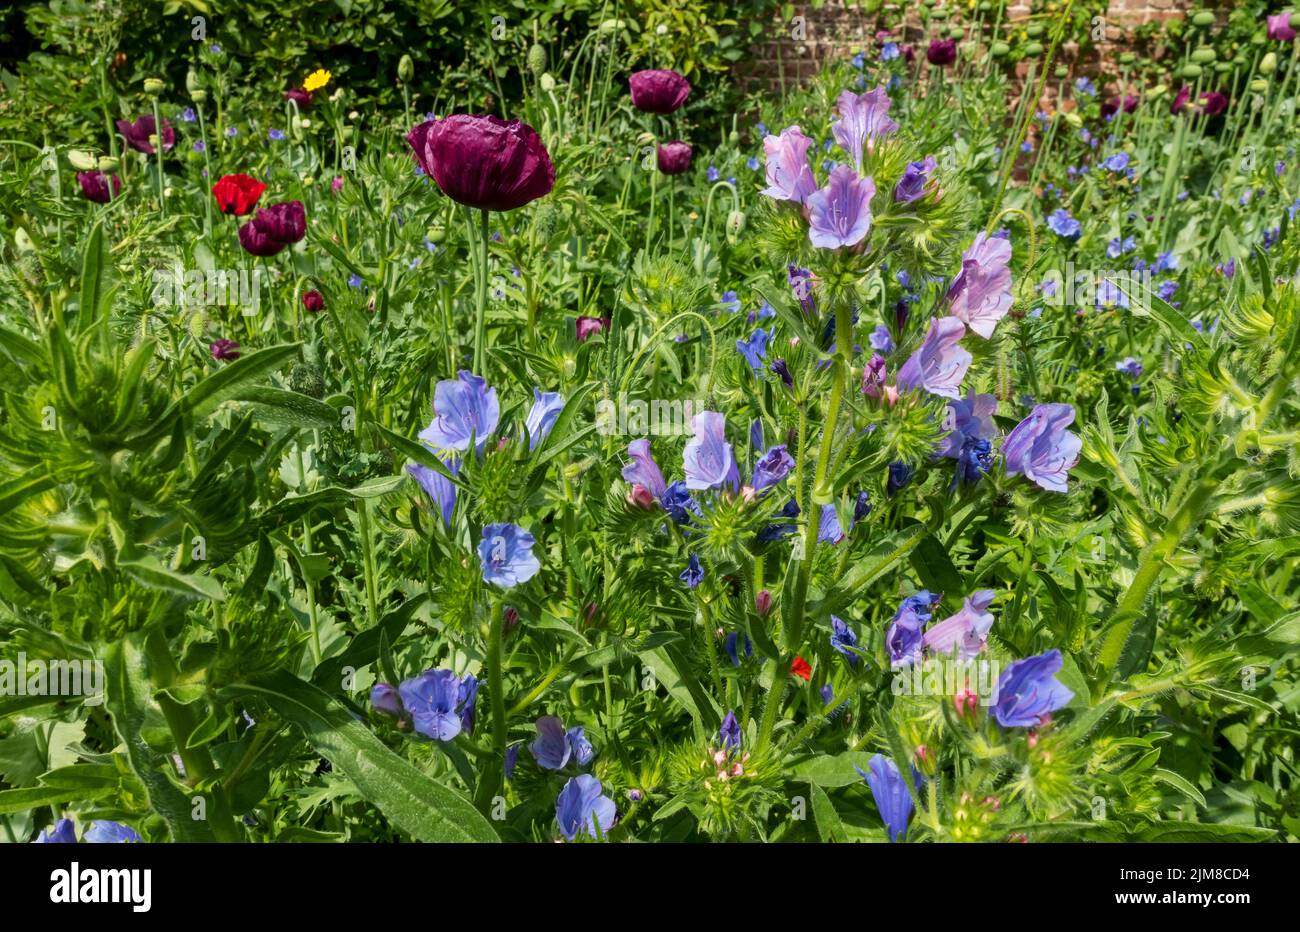 Blue echium and purple poppies wildflower wildflowers flowers in a garden meadow border in summer England UK United Kingdom GB Great Britain Stock Photo